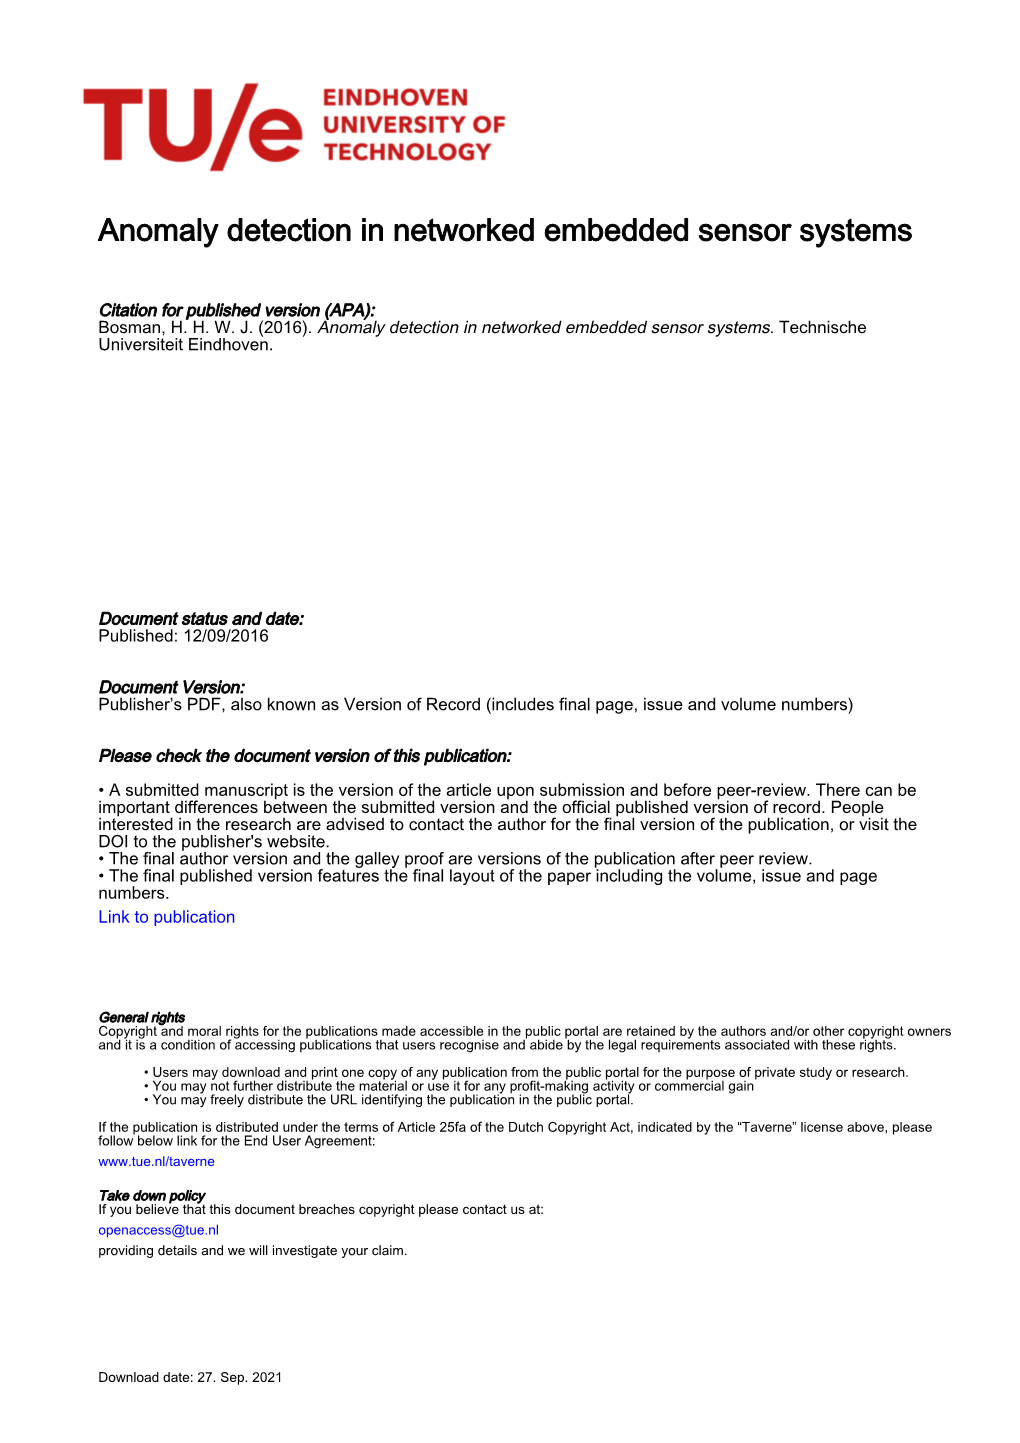 Anomaly Detection in Networked Embedded Sensor Systems